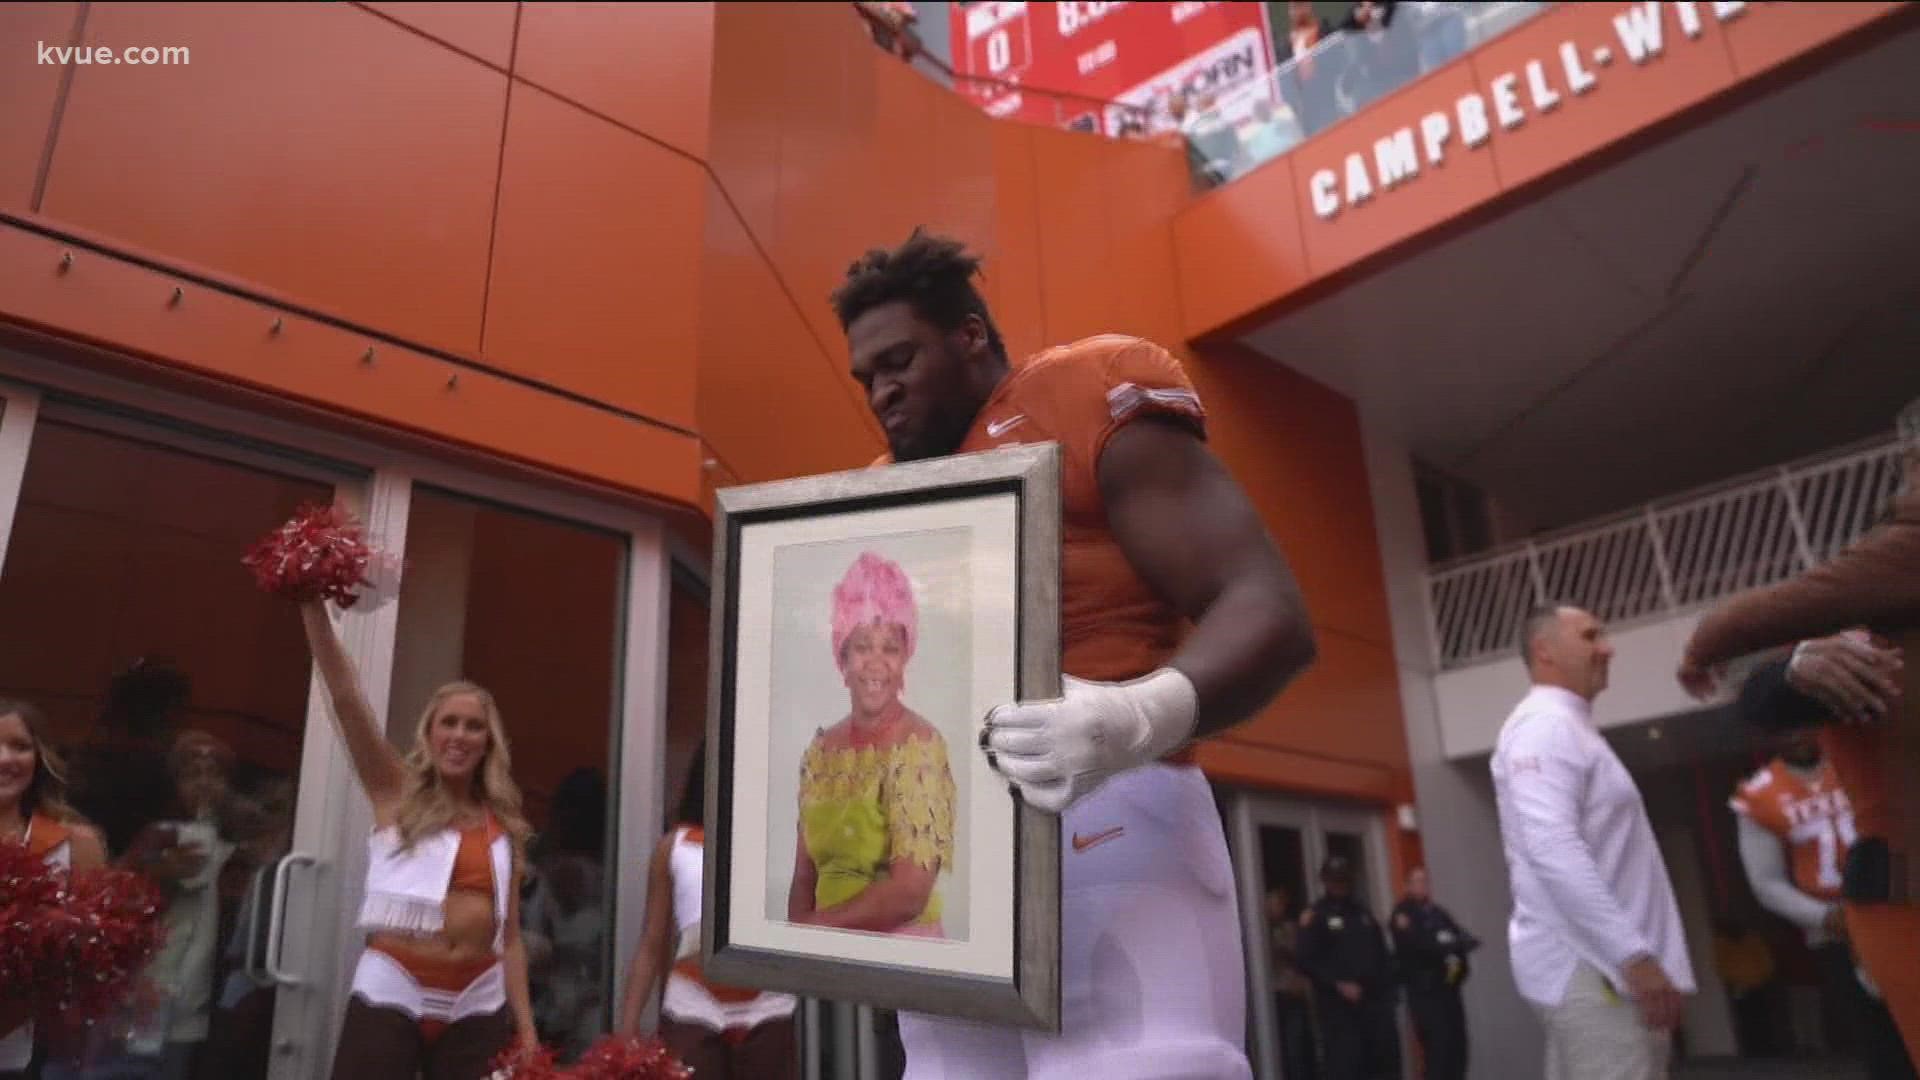 Tope Imade ran out on UT's senior night holding a picture of his mom, Betty.